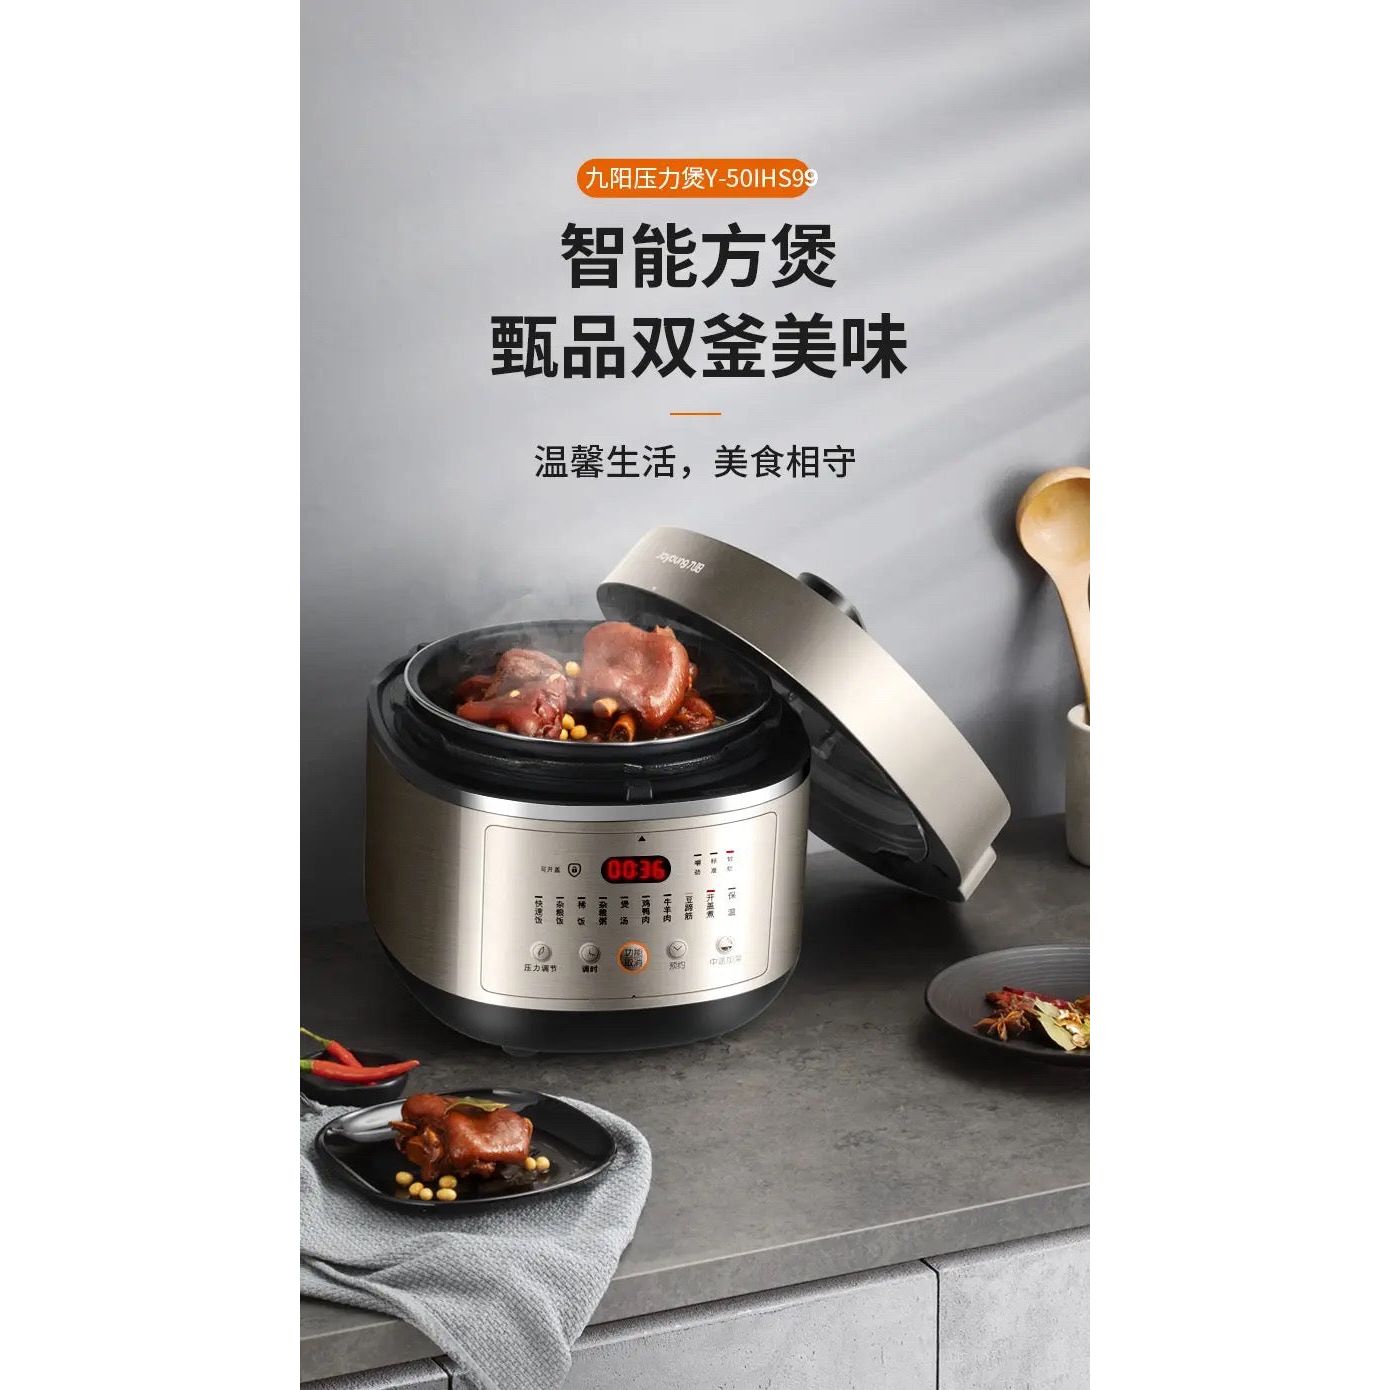 Joyoung Electric Baking Pan/Skillets, Two-Sided Heating, 12 Non-Stick Pan,  30cm, 1600w Adjustable Heating Power, Disassemble for Easy to Clean